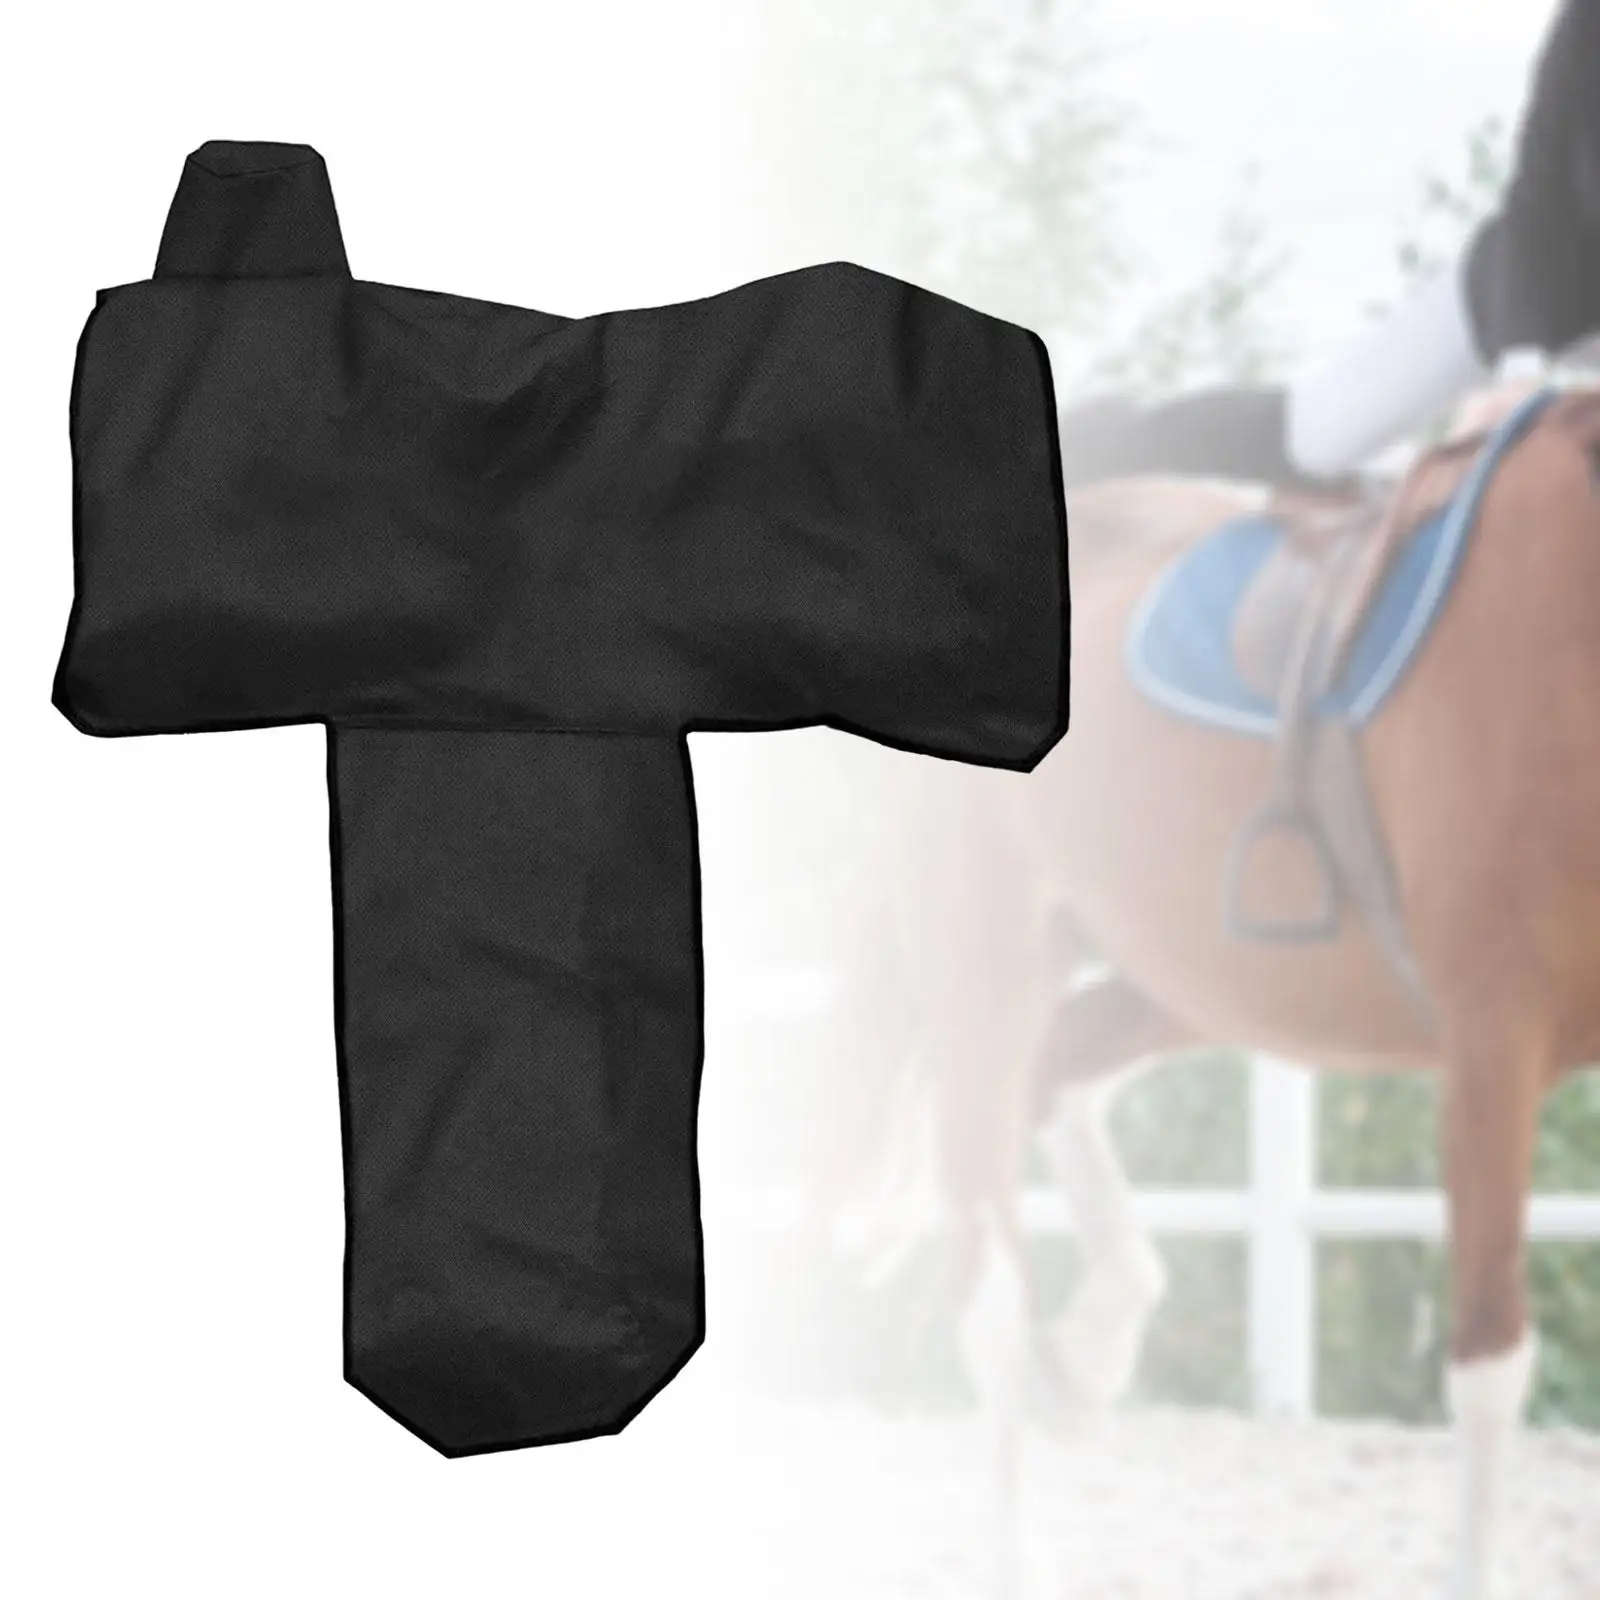 Western Full Saddle Cover Waterproof Dust Resistant Portable Lightweight Black Protection Protect Cover for Western Saddles